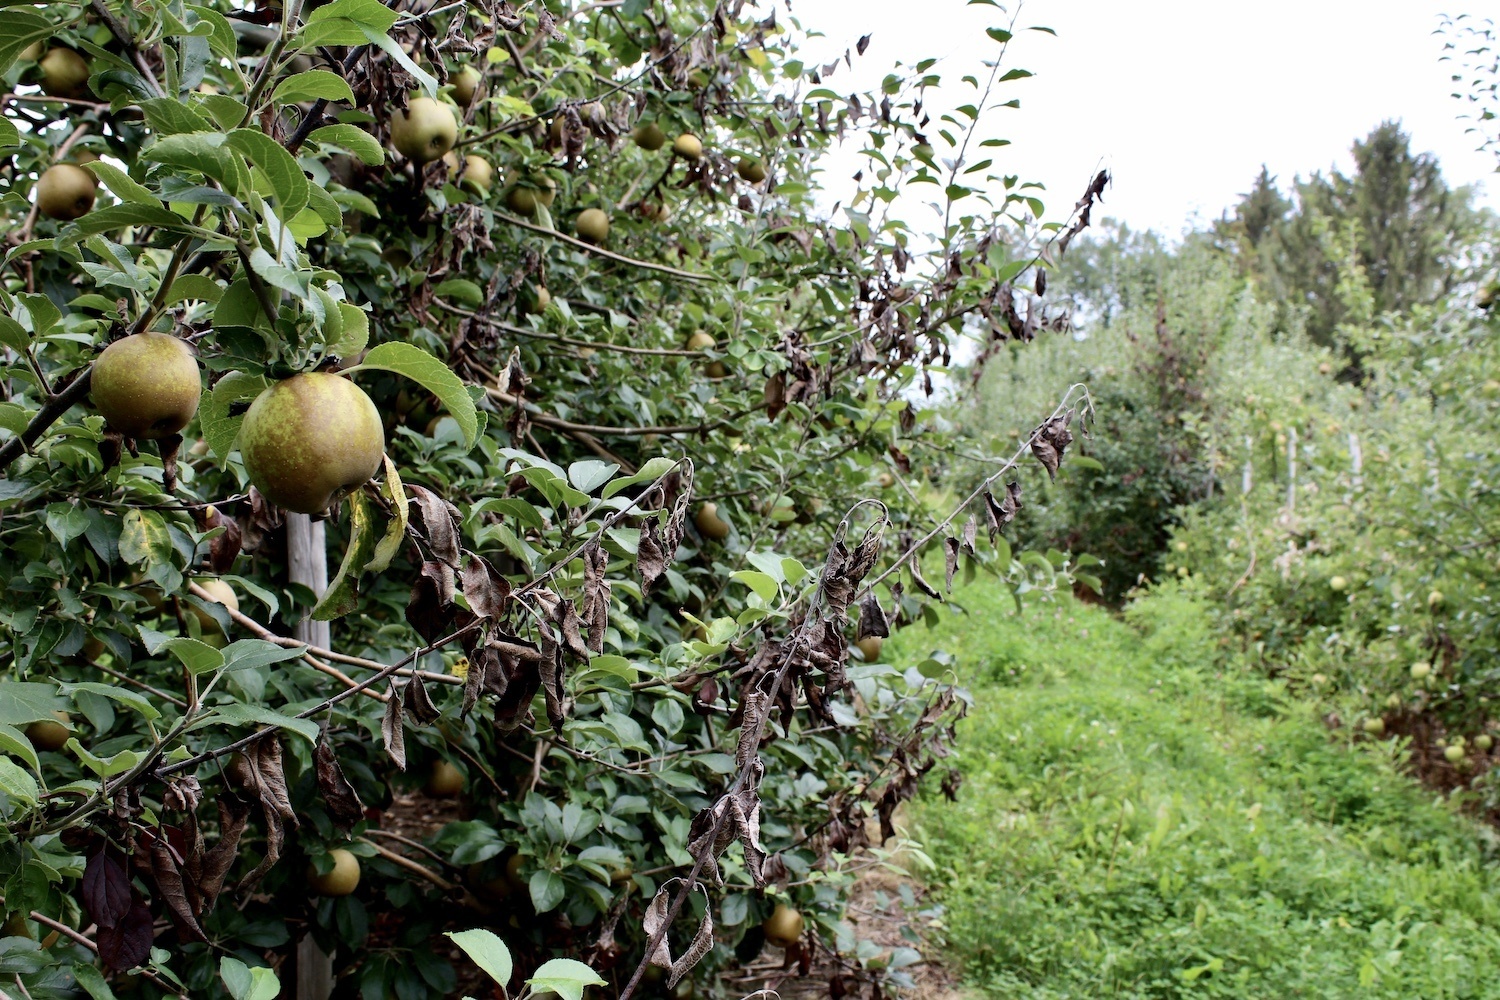 Apple trees infected with fire blight in Khan's orchard.